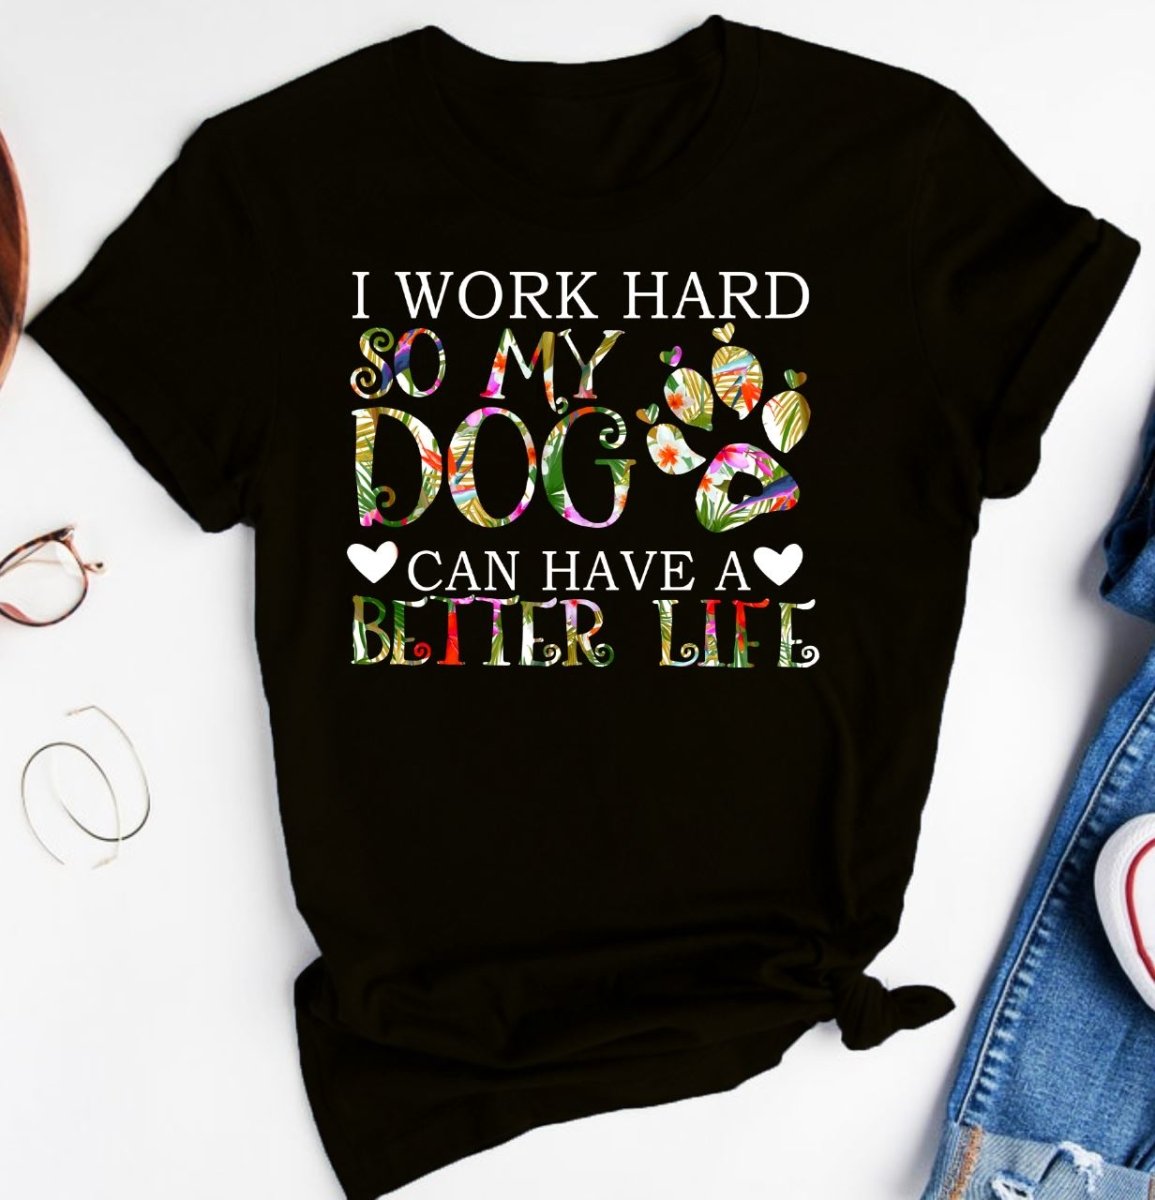 WORK HARD FOR MY DOG TEE - DOGSTROM